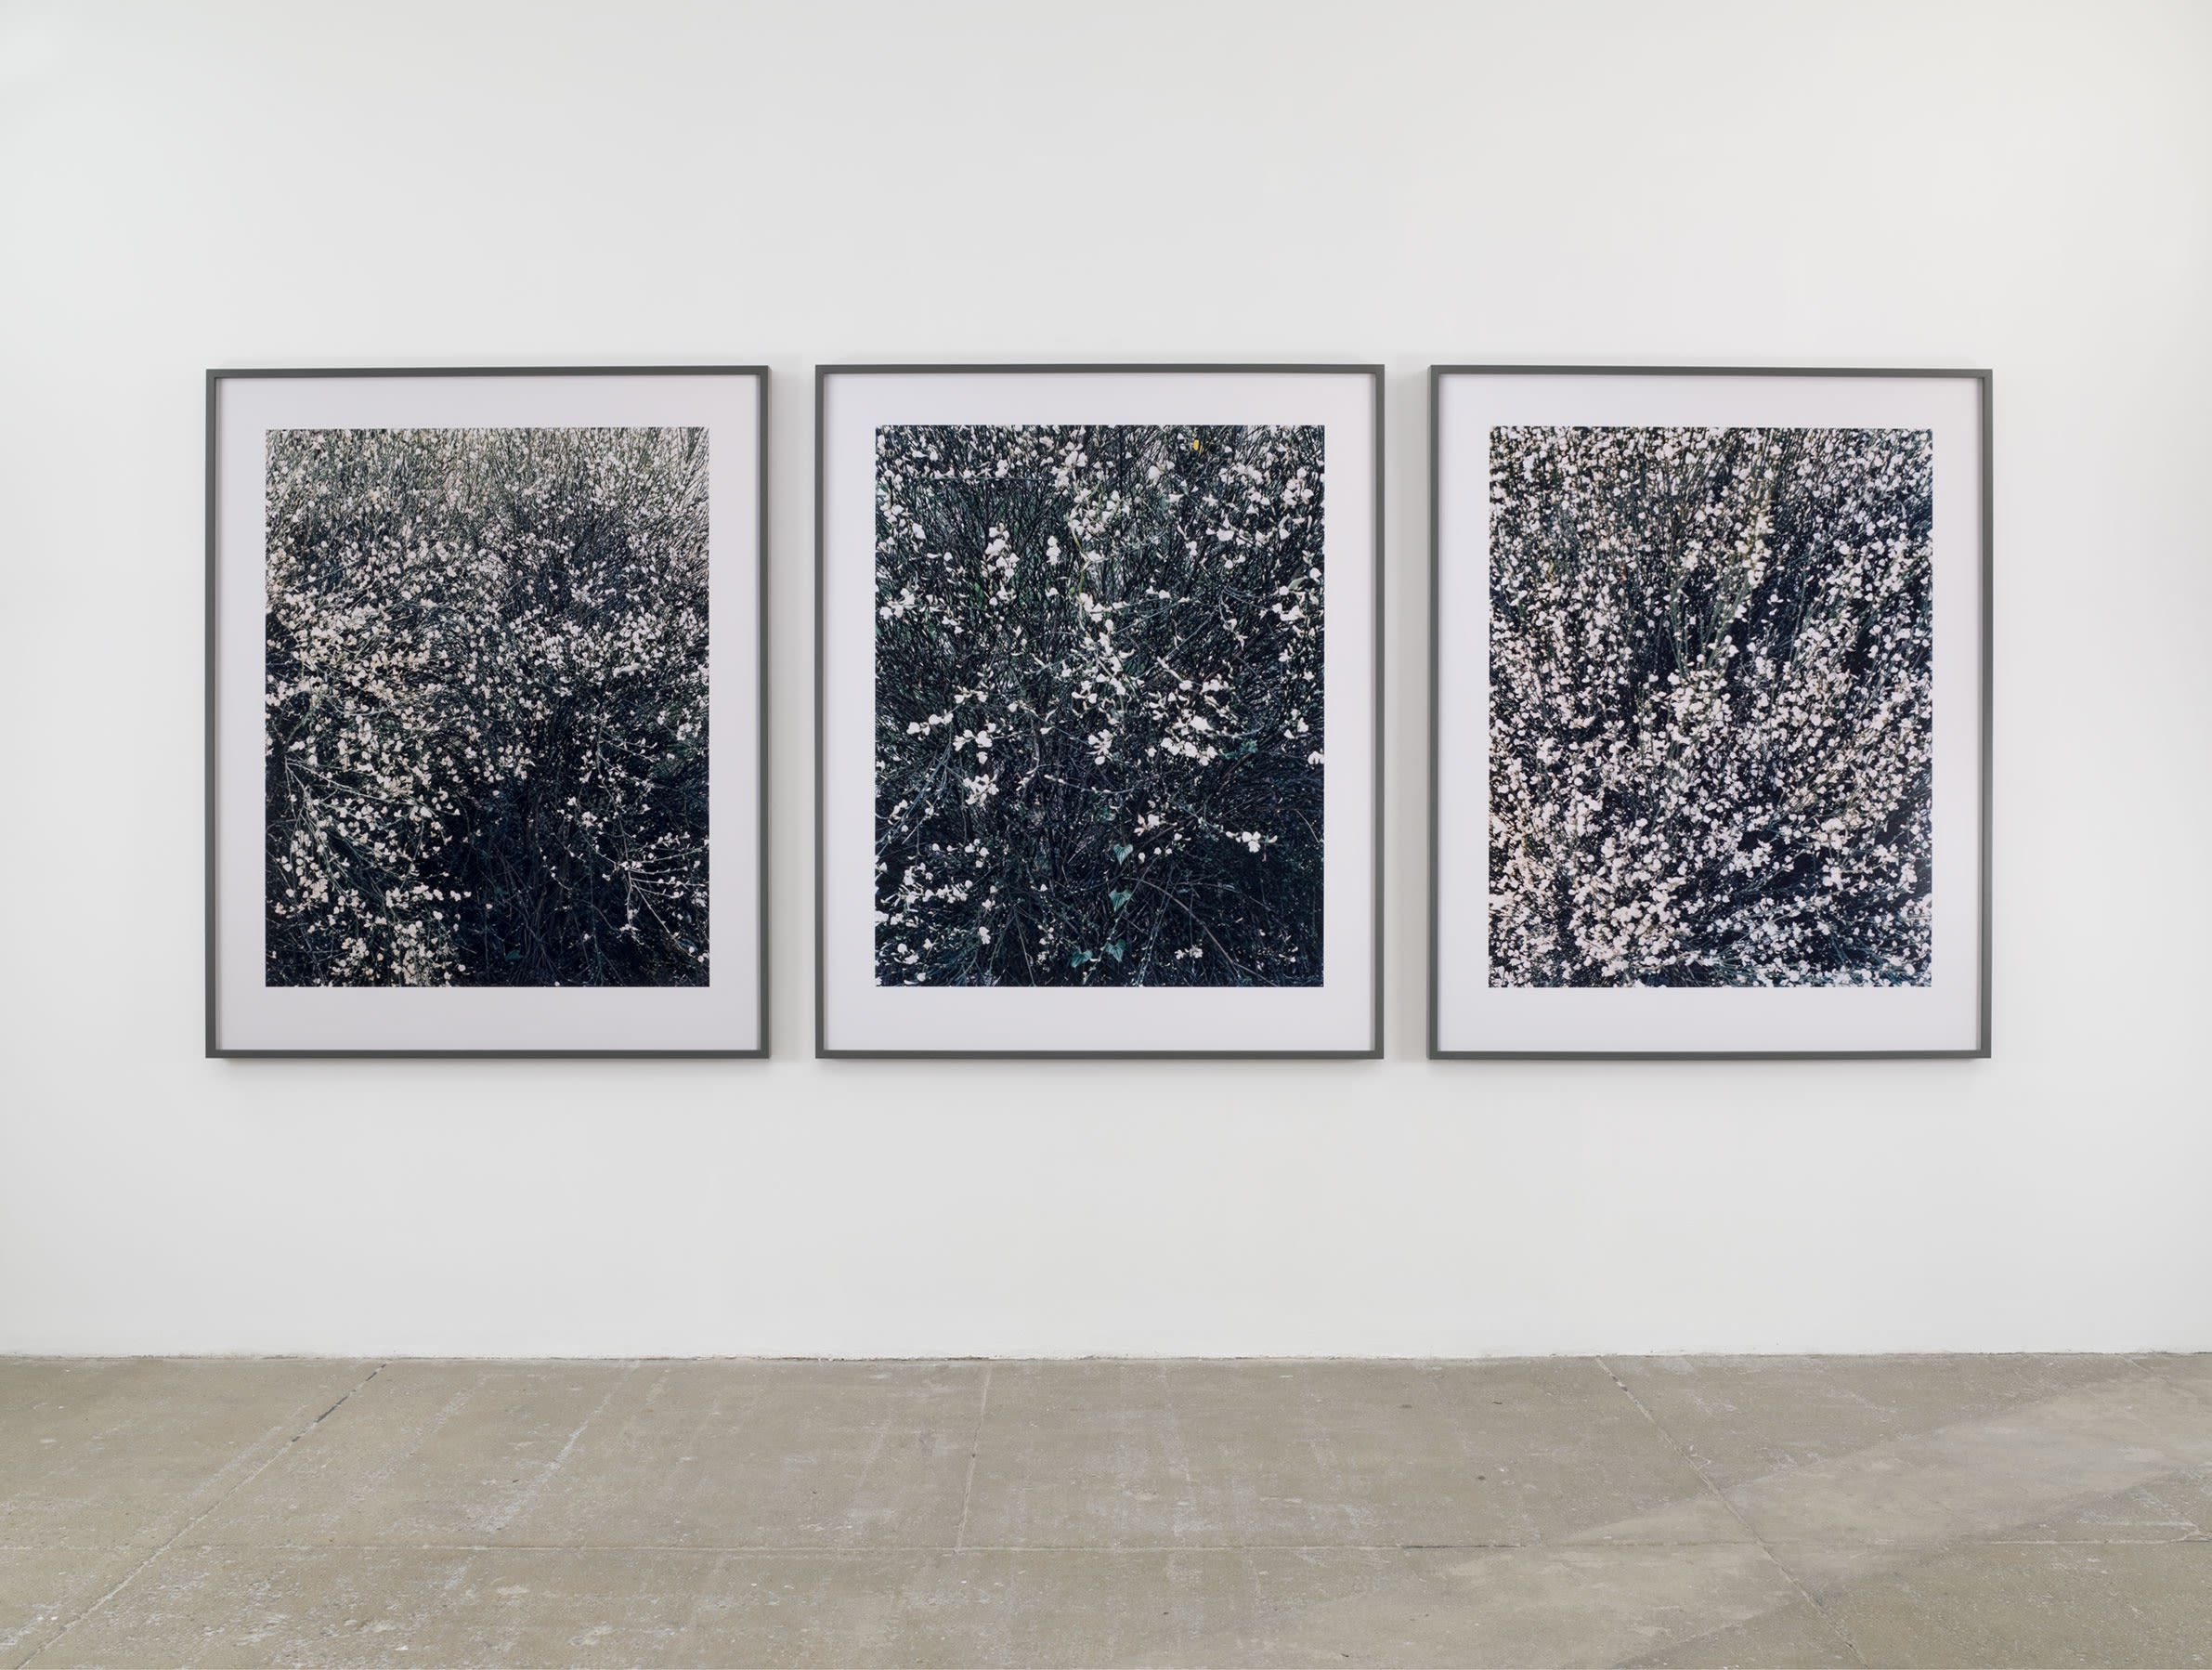 Three large framed photographs of close-ups of bushes hang alongside each other on a white wall. 